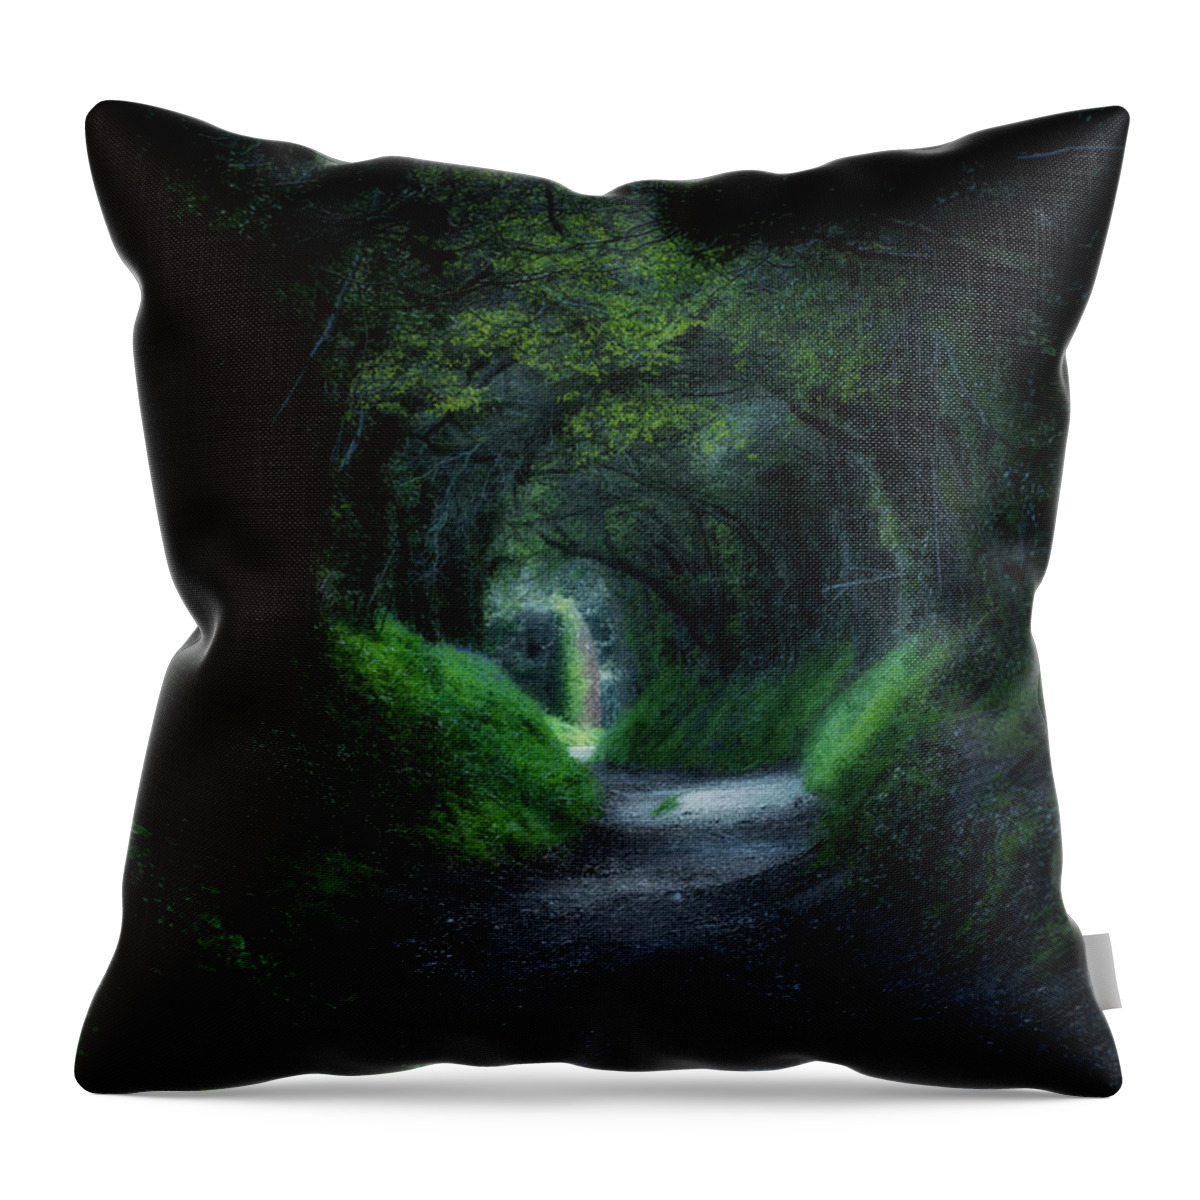 Mill Lane Throw Pillow featuring the photograph Halnaker - England #4 by Joana Kruse